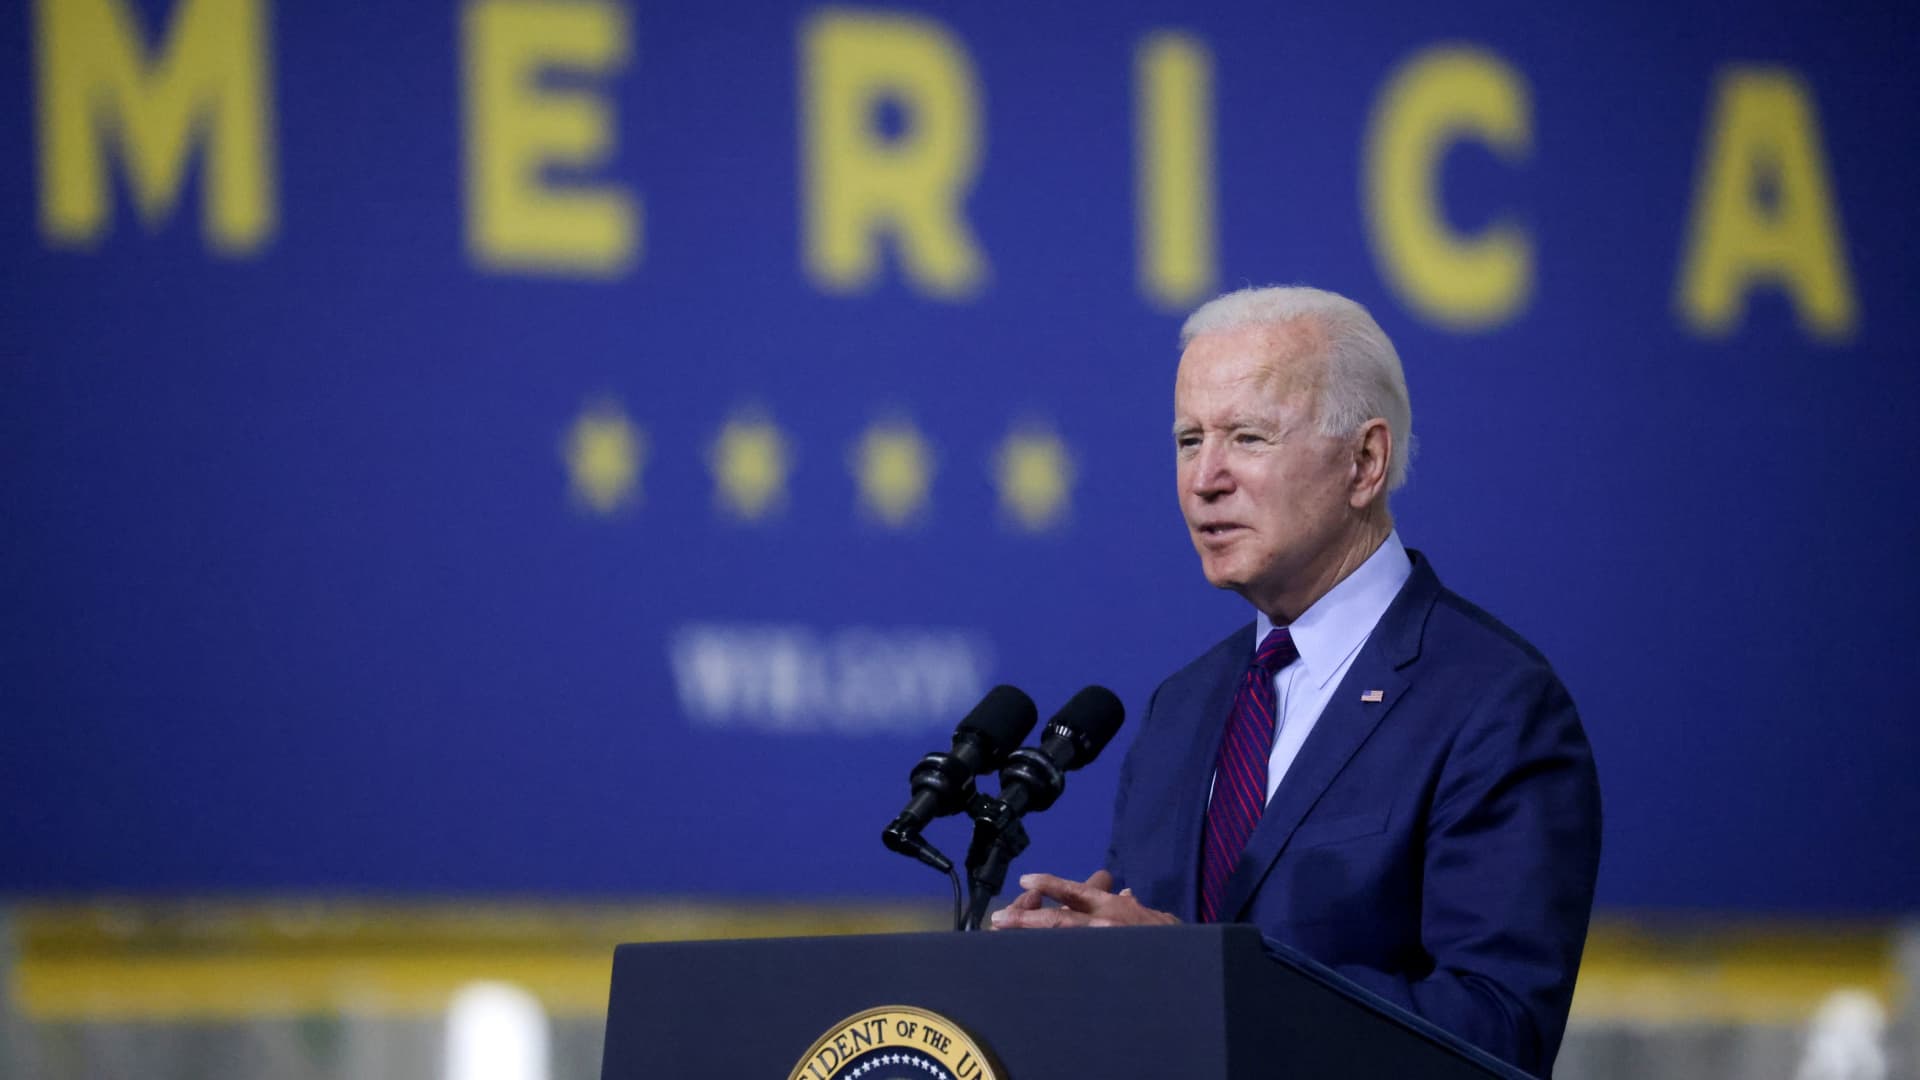 President Joe Biden delivers remarks after touring Ford Rouge Electric Vehicle Center in Dearborn, Michigan, U.S., May 18, 2021.